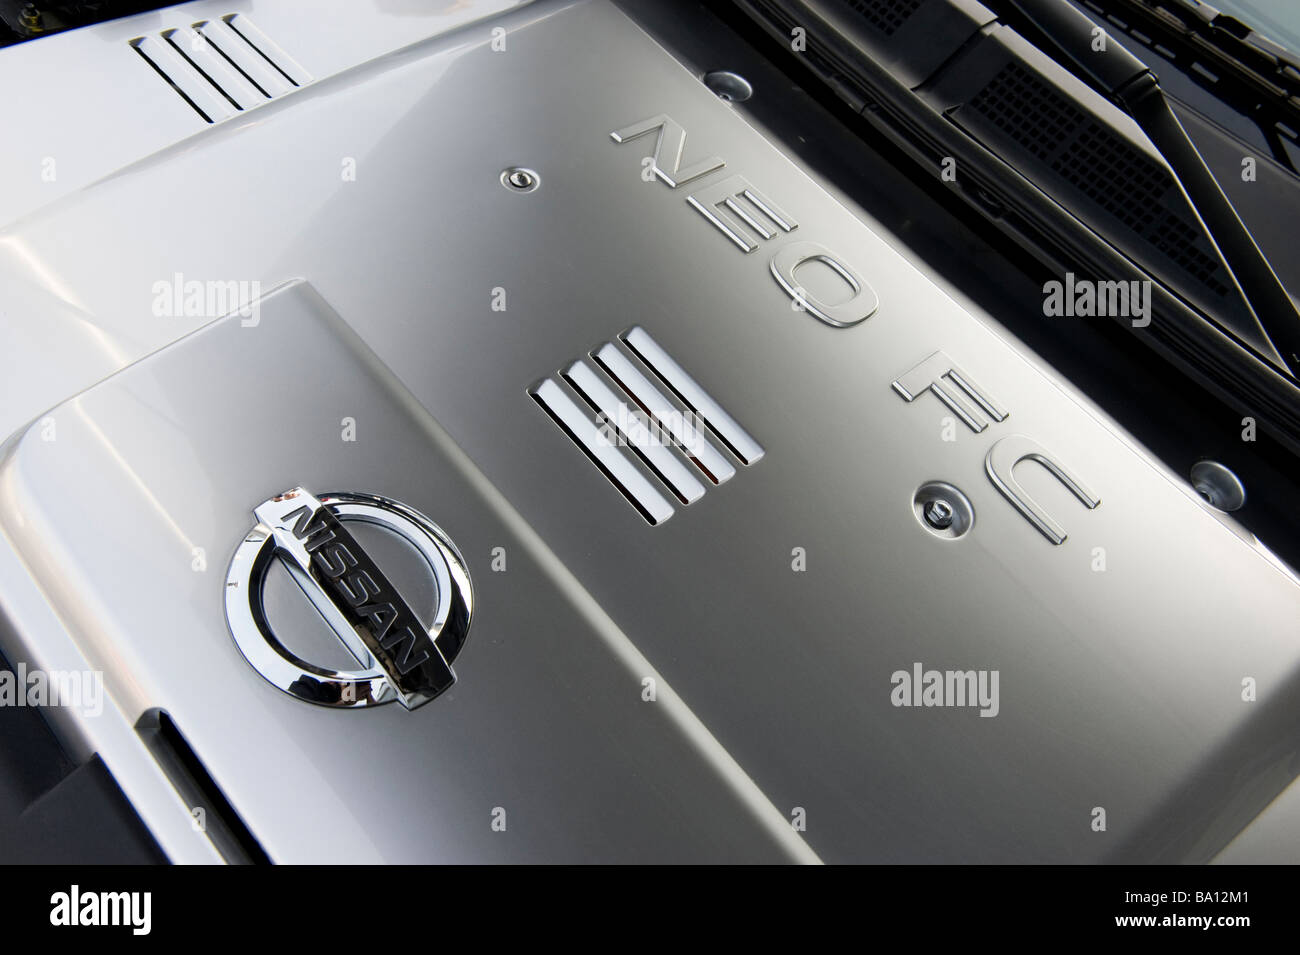 Engine bay of a Nissan hydrogen fuel cell (FCV) battery-powered vehicle Stock Photo